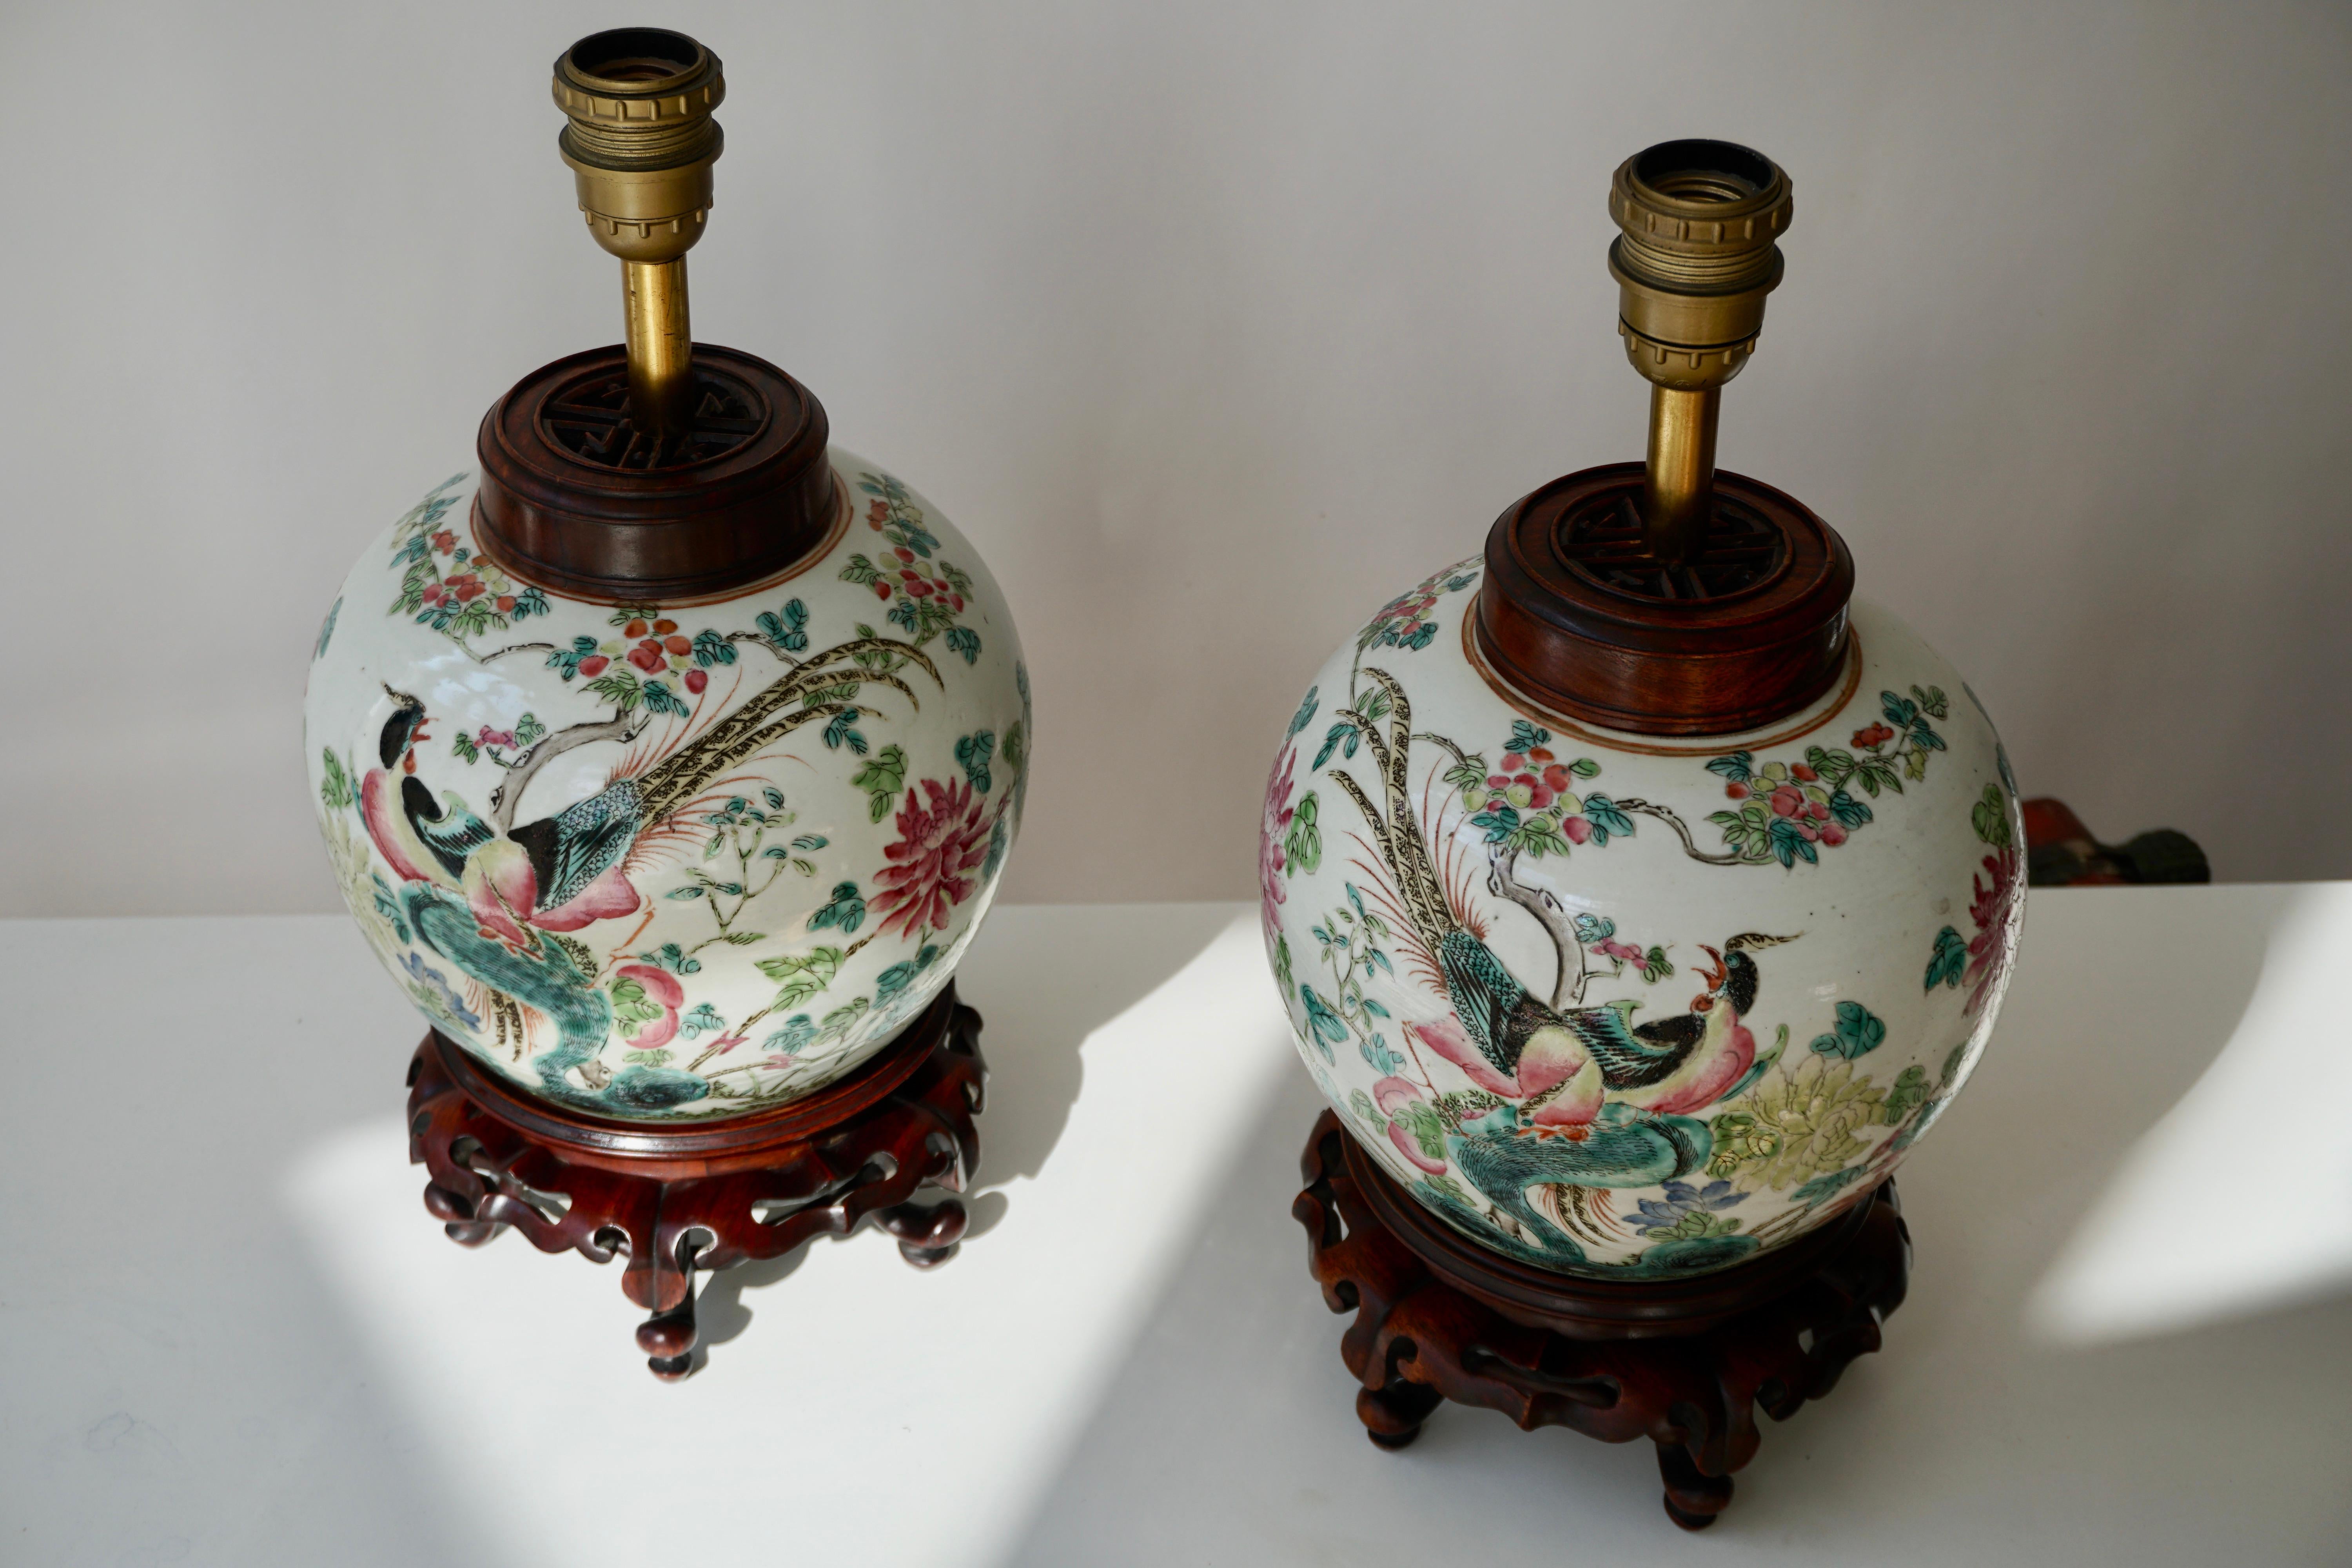 20th Century Pair of Chinese Export Porcelain Painted Ginger Jar Table Lamps with Birds